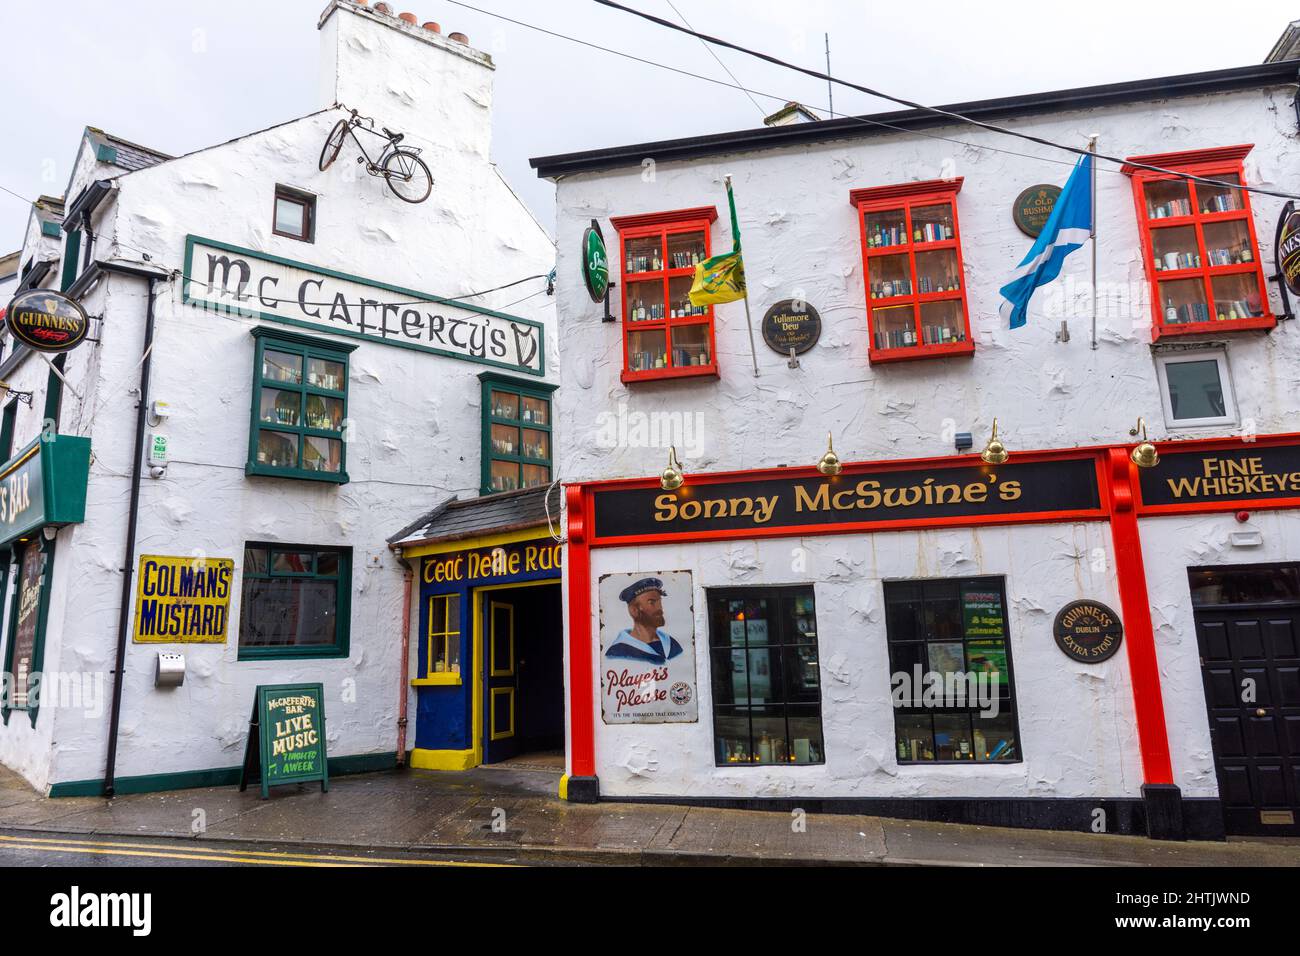 Farbenfrohe Bar-Pub-Fassade in Donegal Town, County Donegal, Irland. Stockfoto